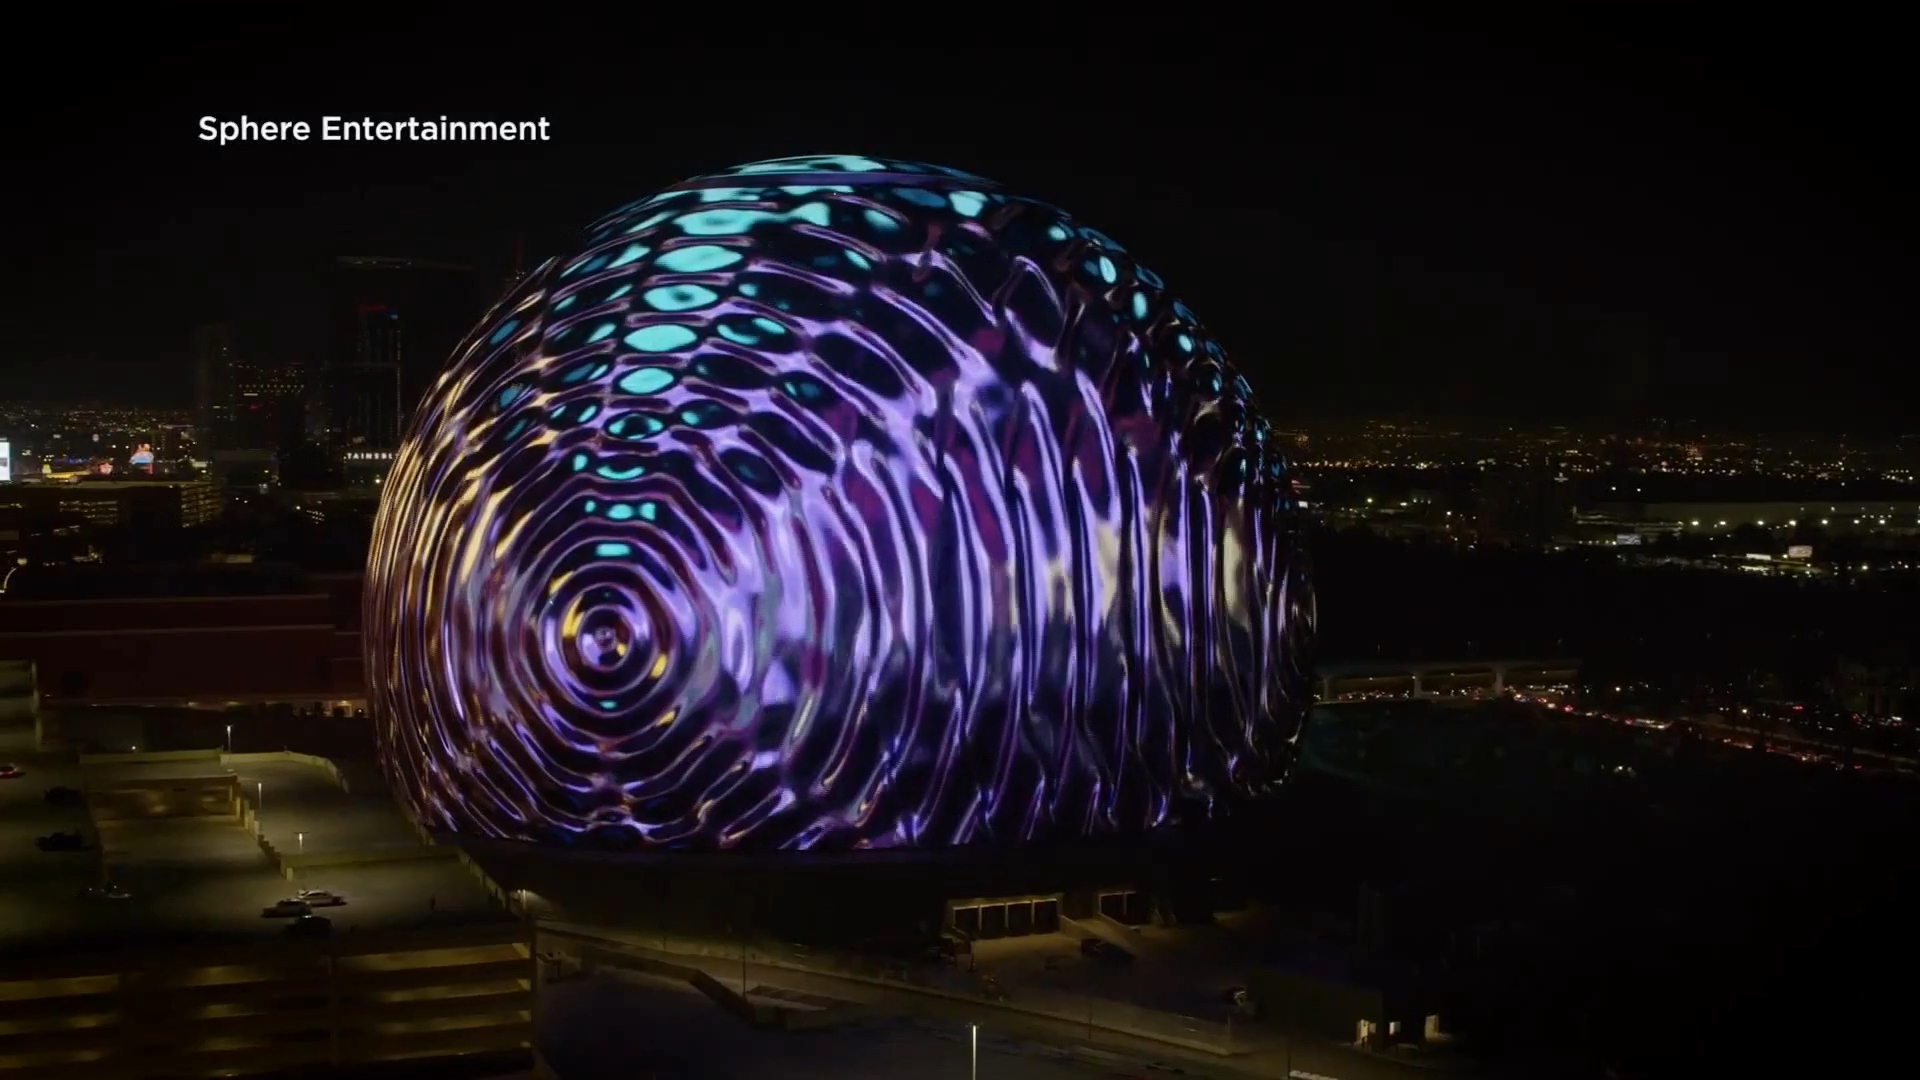 The game has truly changed. Footage from @Sphere opening night with @U, Sphere Las Vegas